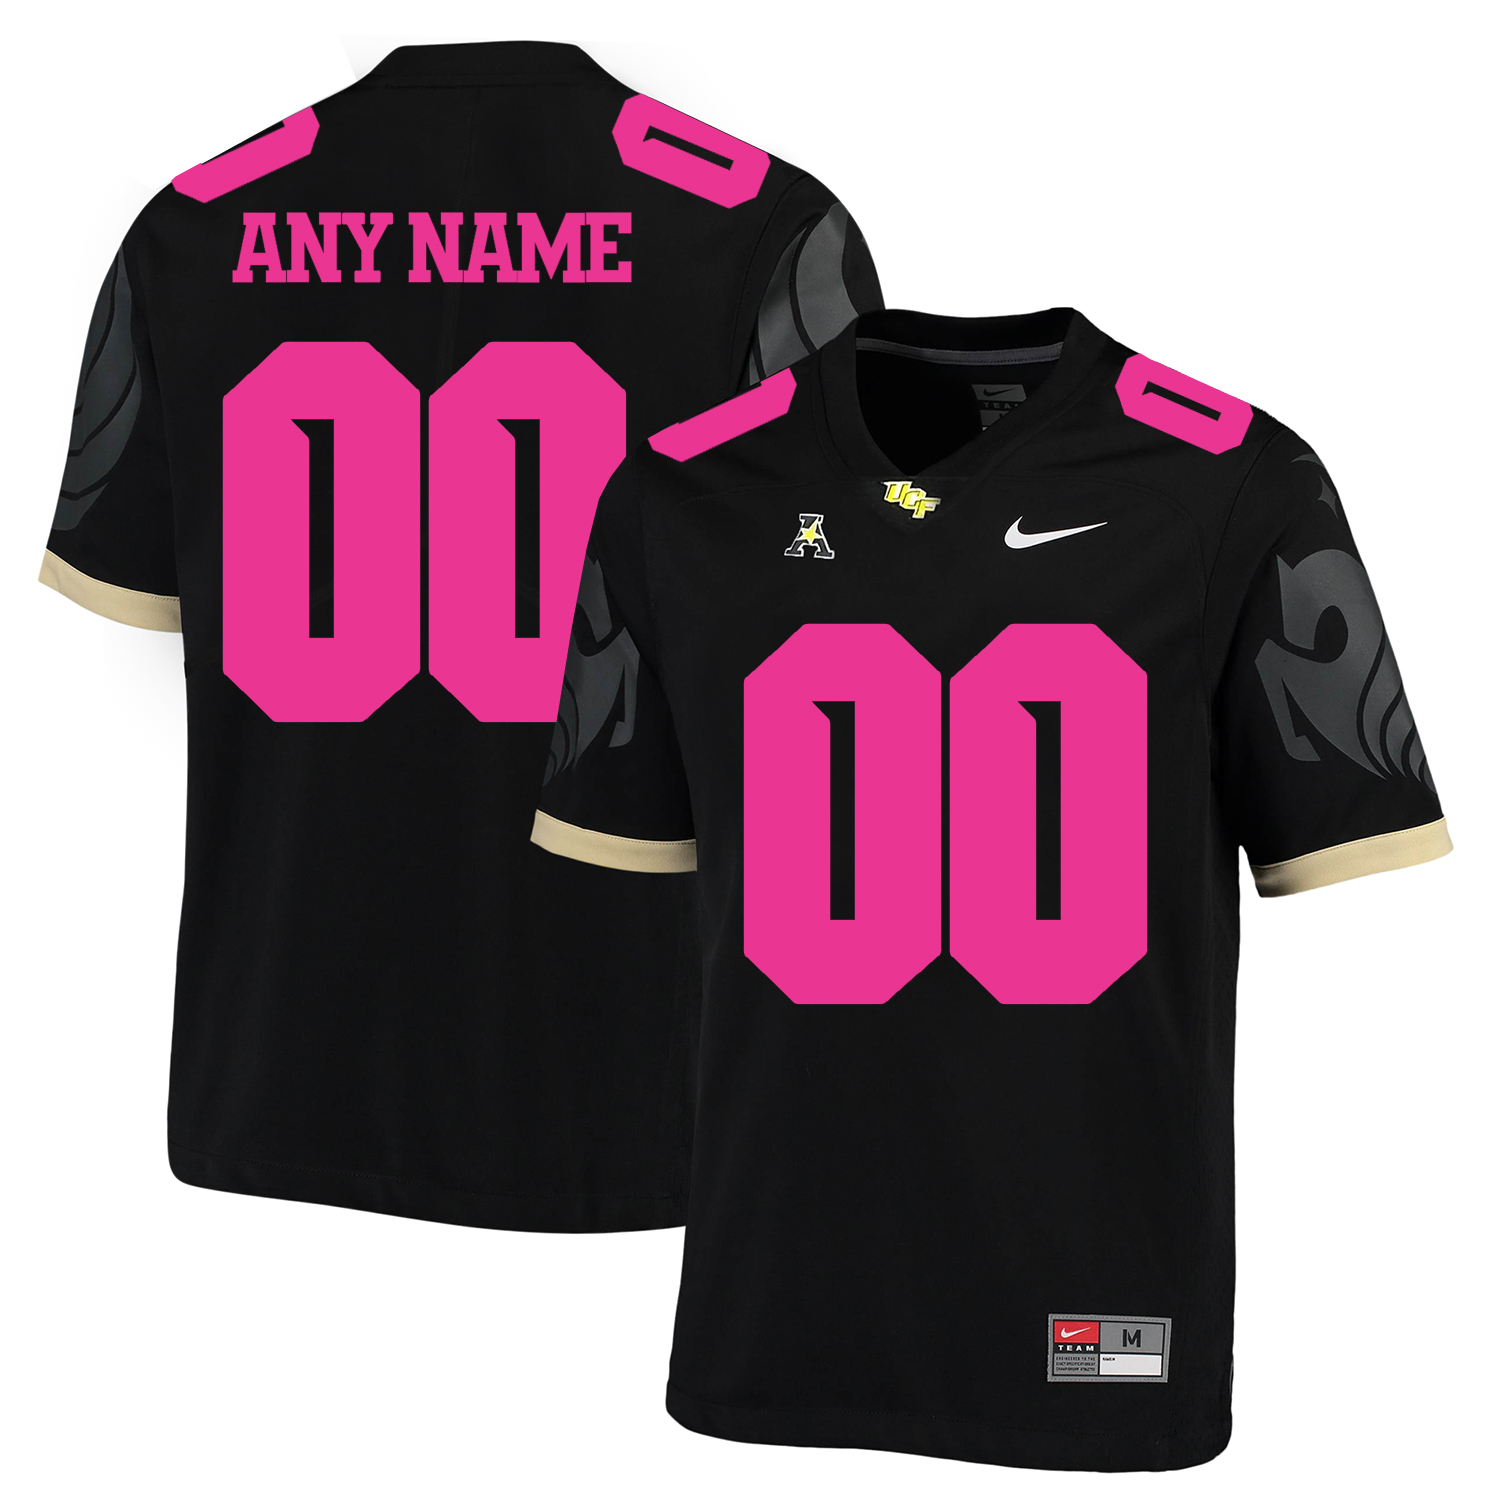 UCF Knights Black 2018 Breast Cancer Awareness Men's Customized College Football Jersey